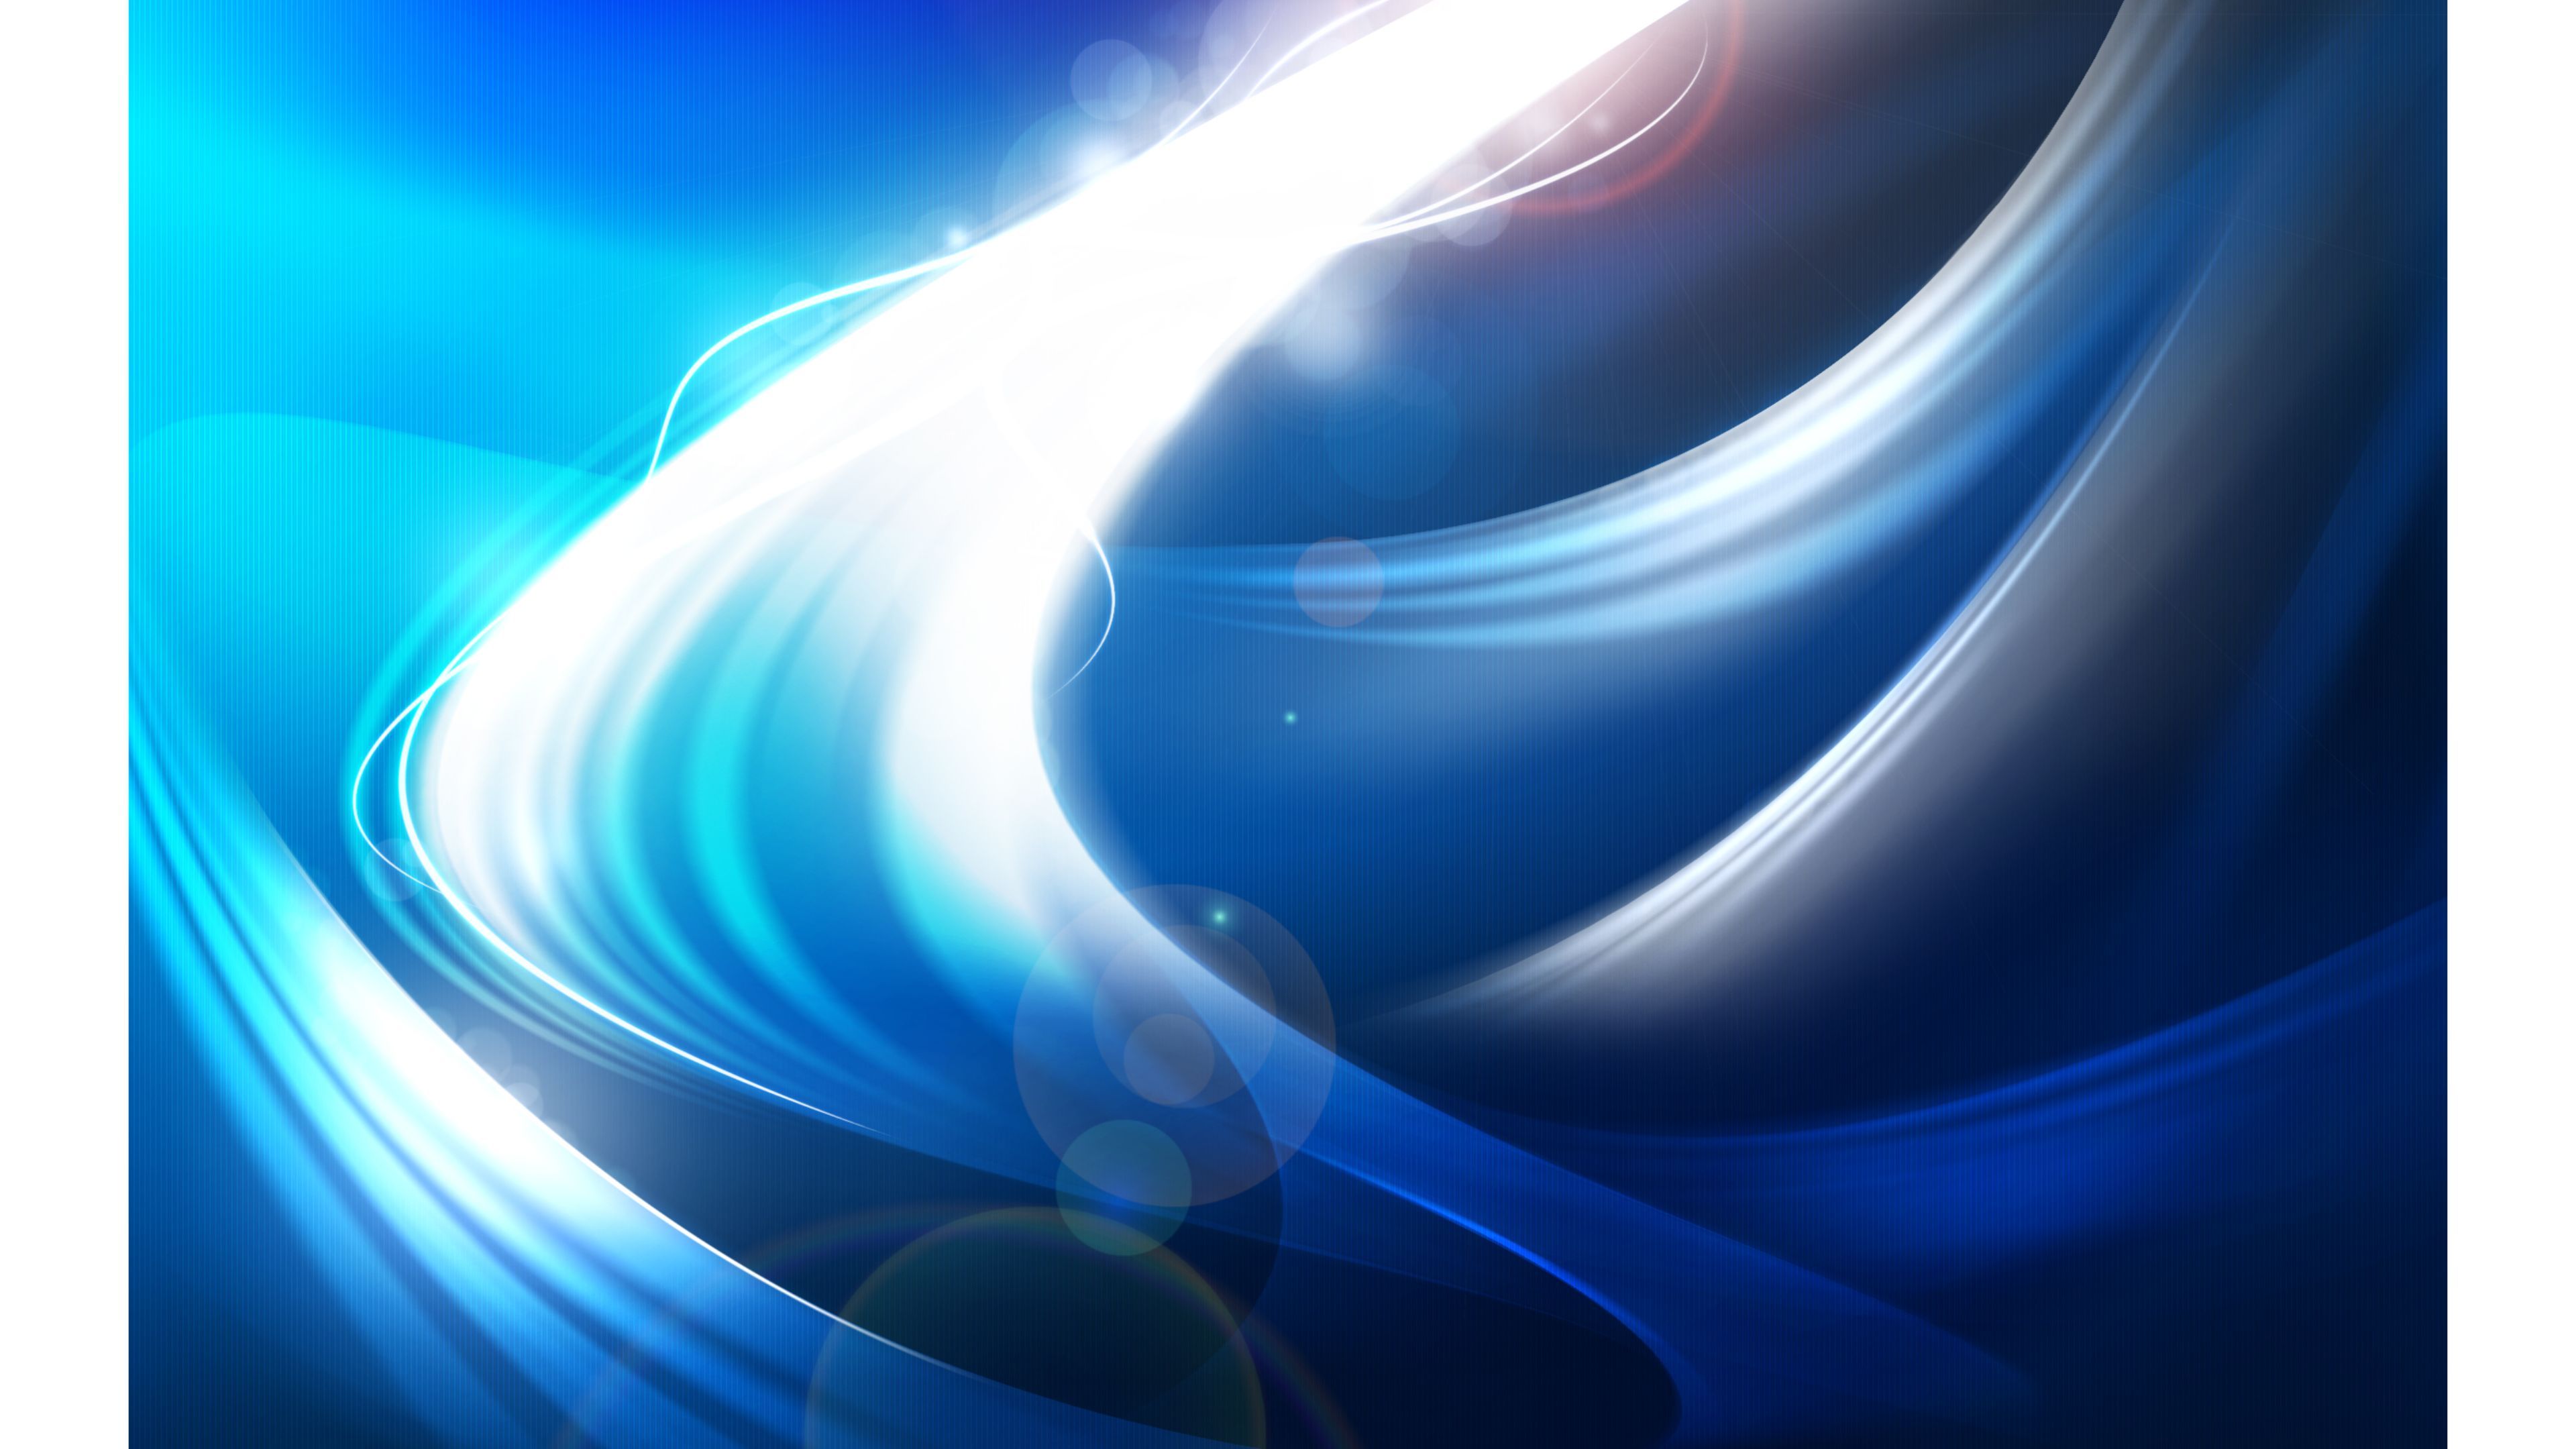 White Waves of Blue Abstract S 4K wallpaper